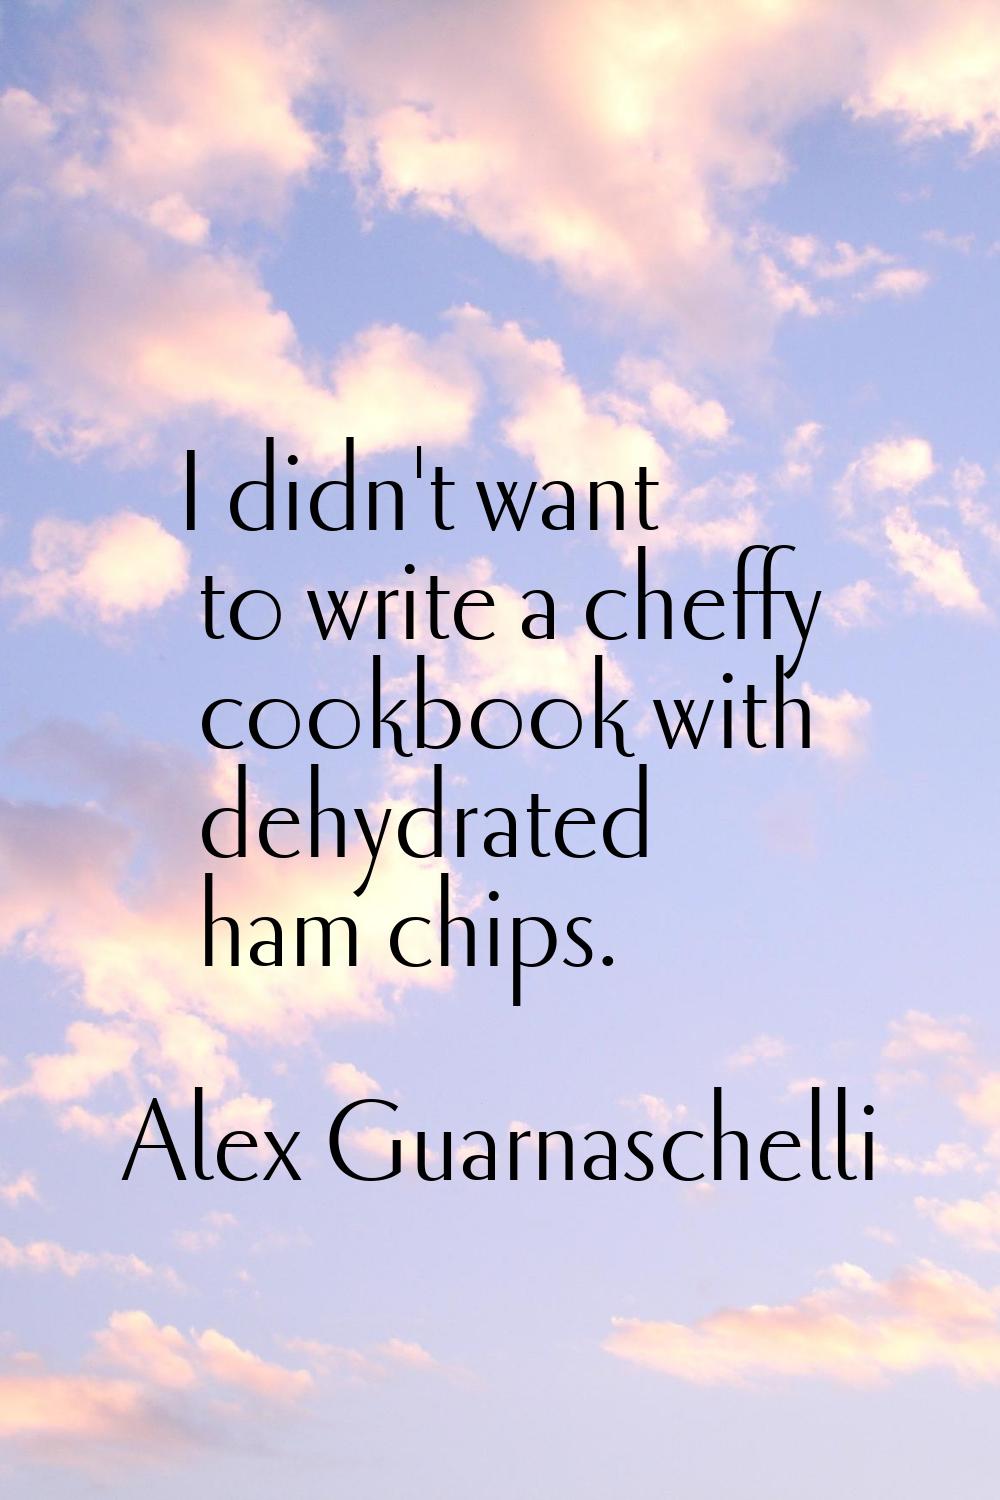 I didn't want to write a cheffy cookbook with dehydrated ham chips.